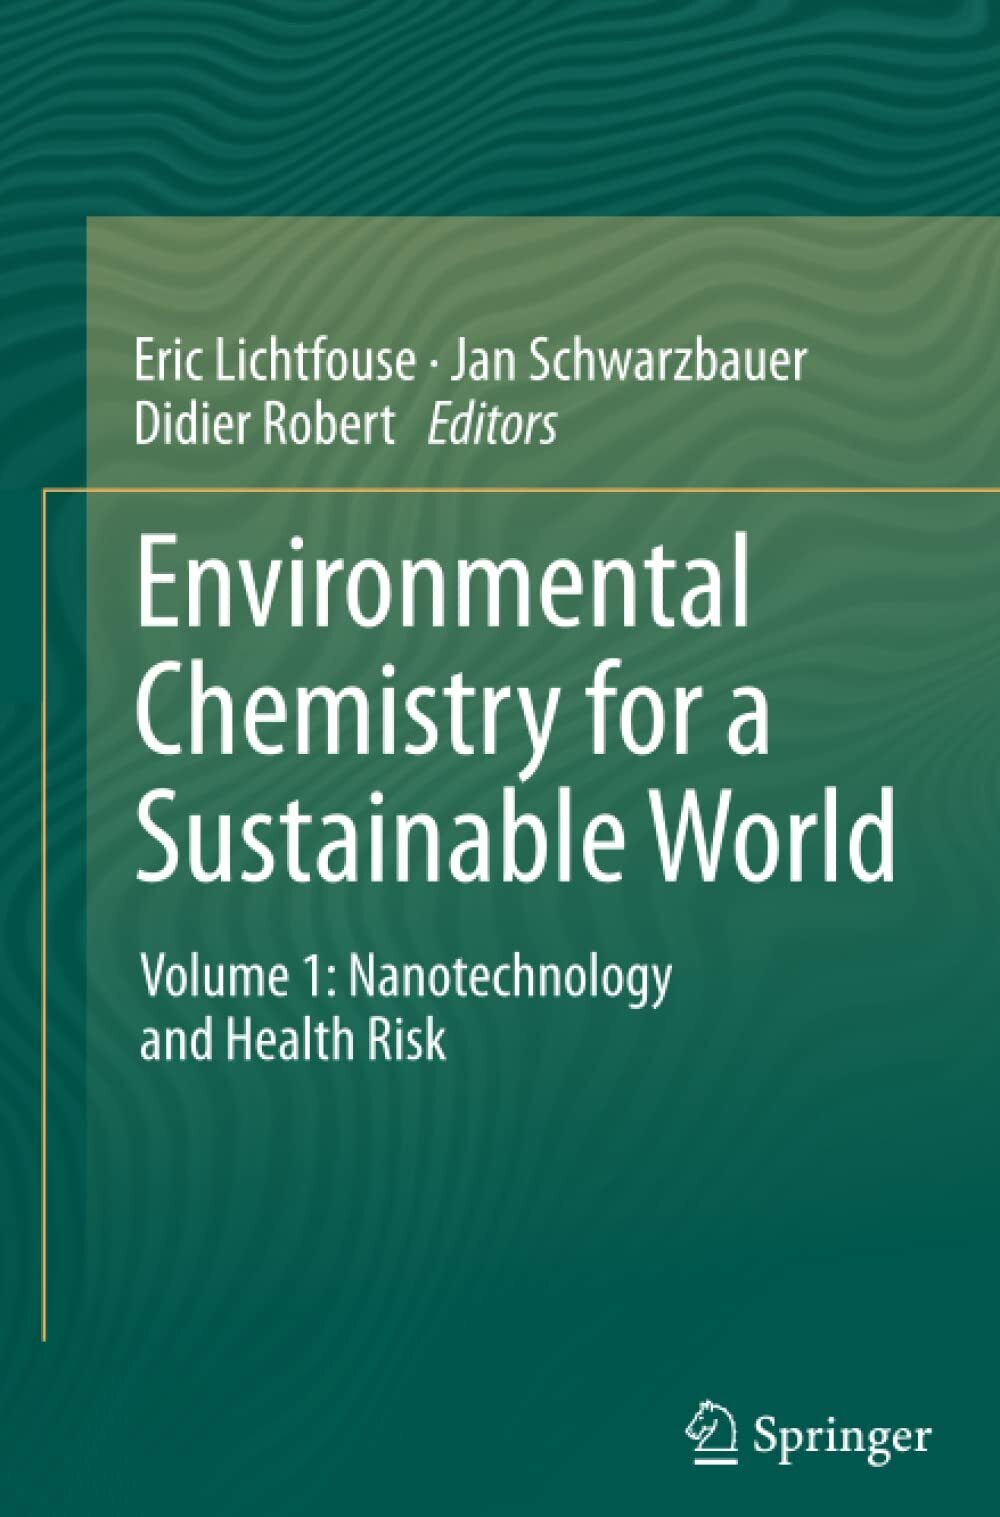 Environmental Chemistry for a Sustainable World - Eric Lichtfouse -Springer,2014 libro usato